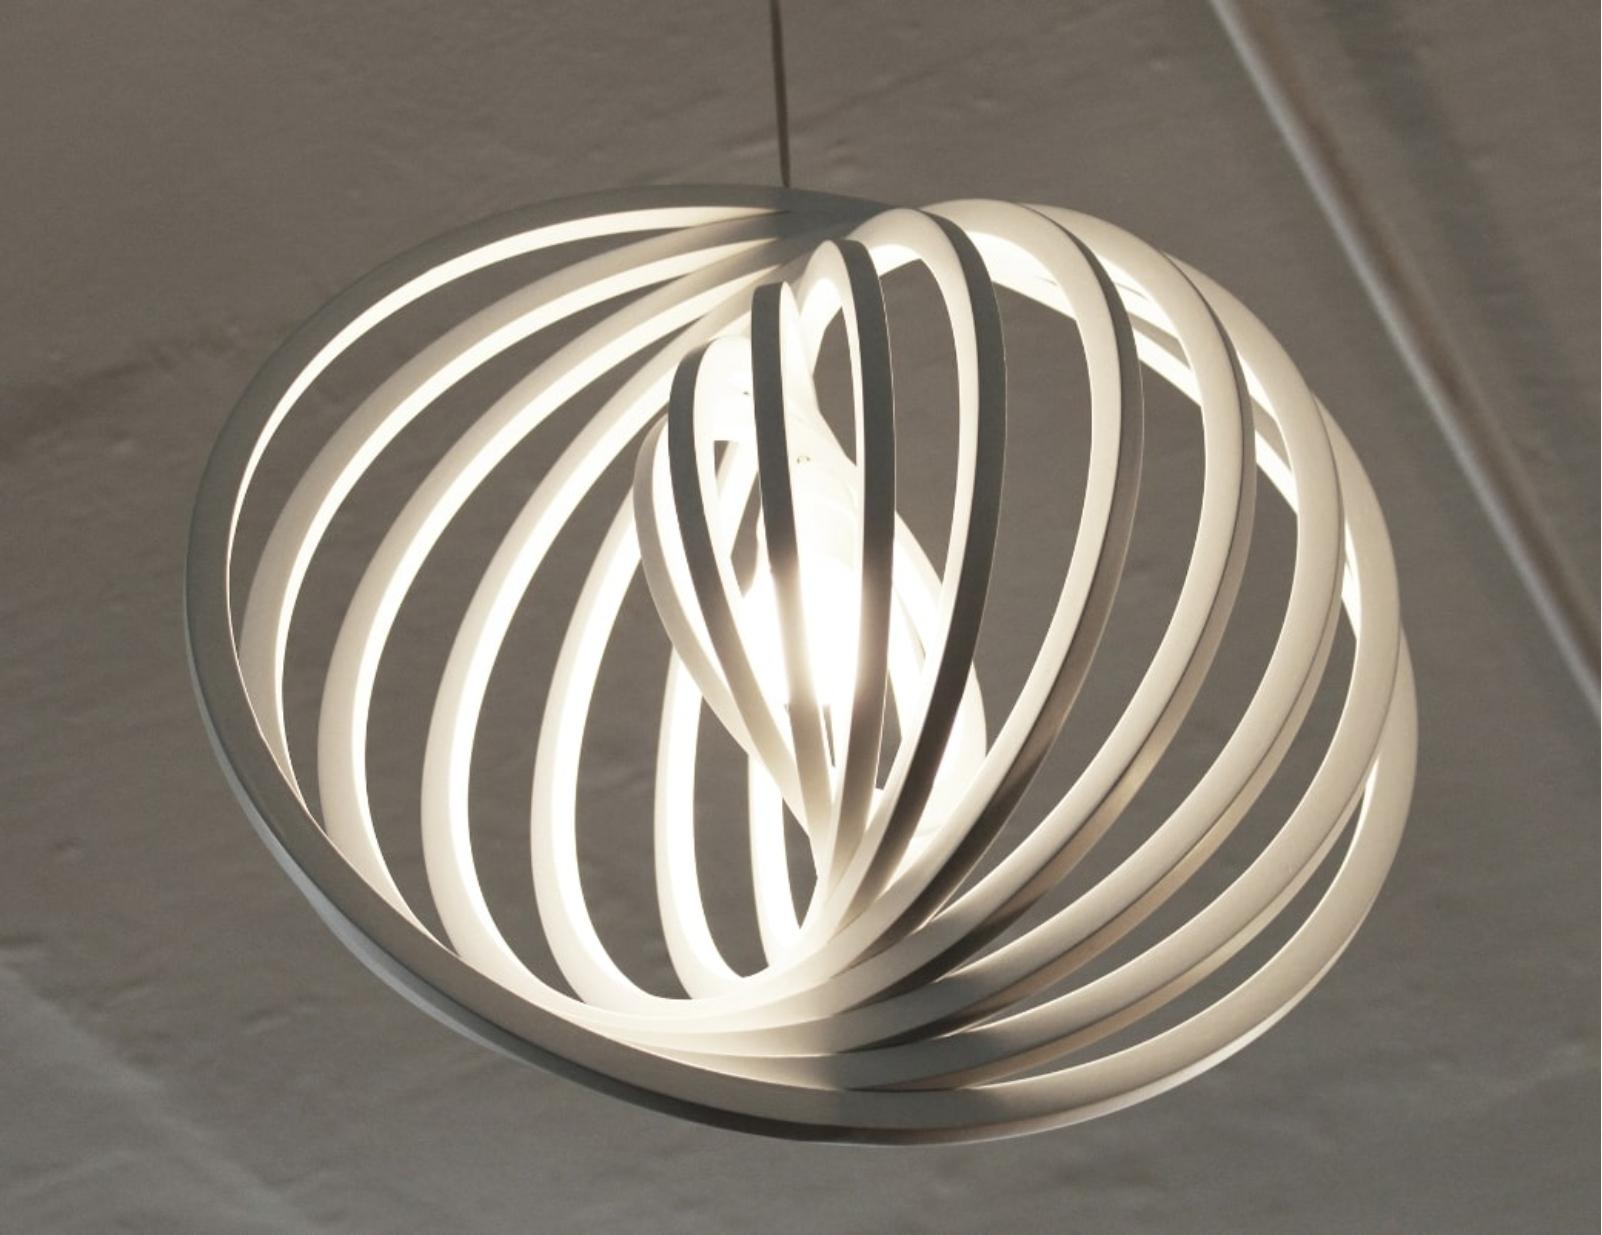 Engiro Ceiling Light, Maria Beckmann, Represented by Tuleste Factory For Sale 2